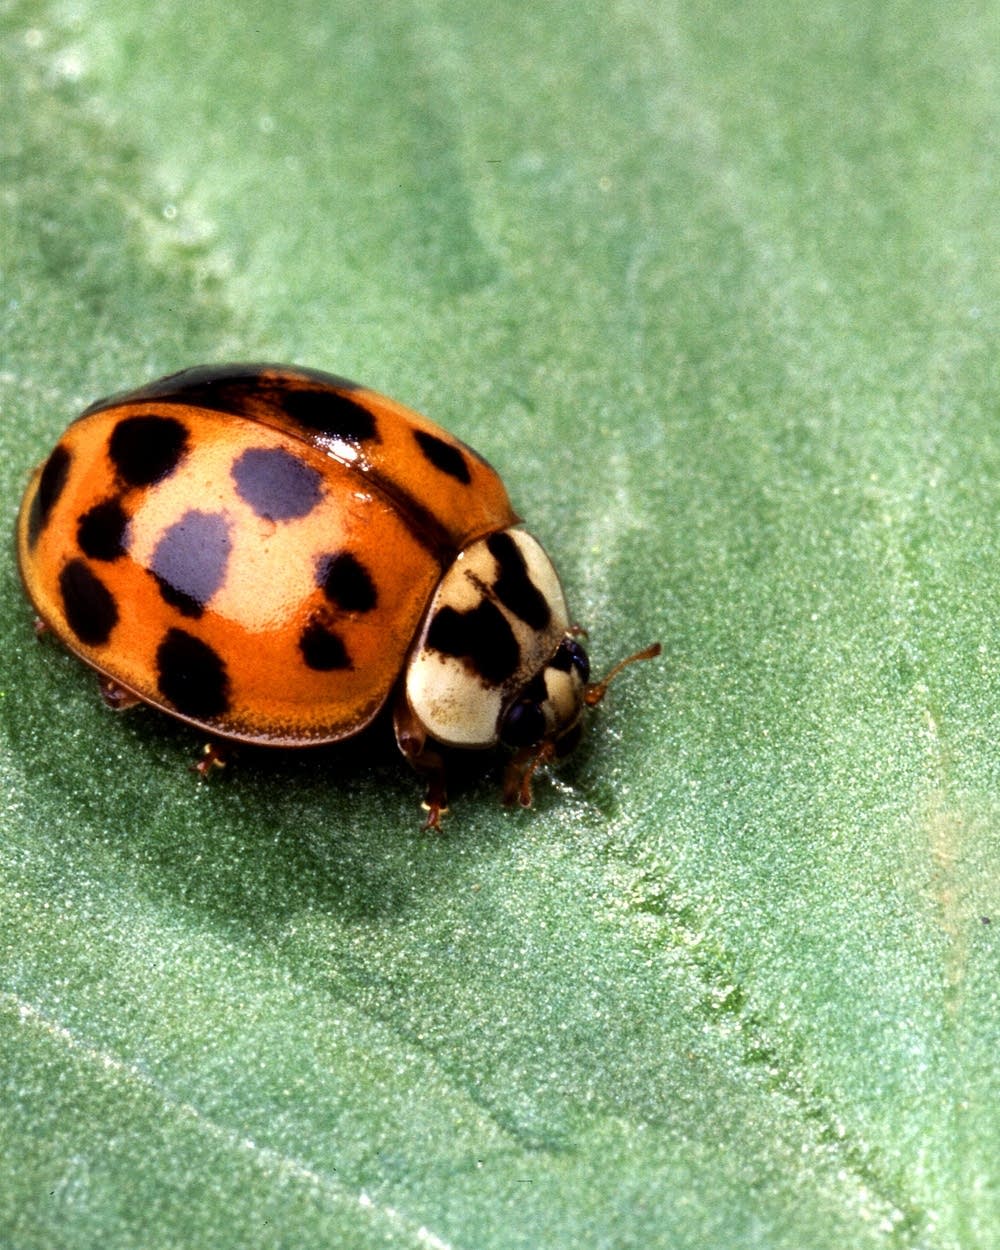 How to Prevent and Control Asian Beetle Infestations in Minnesota Homes